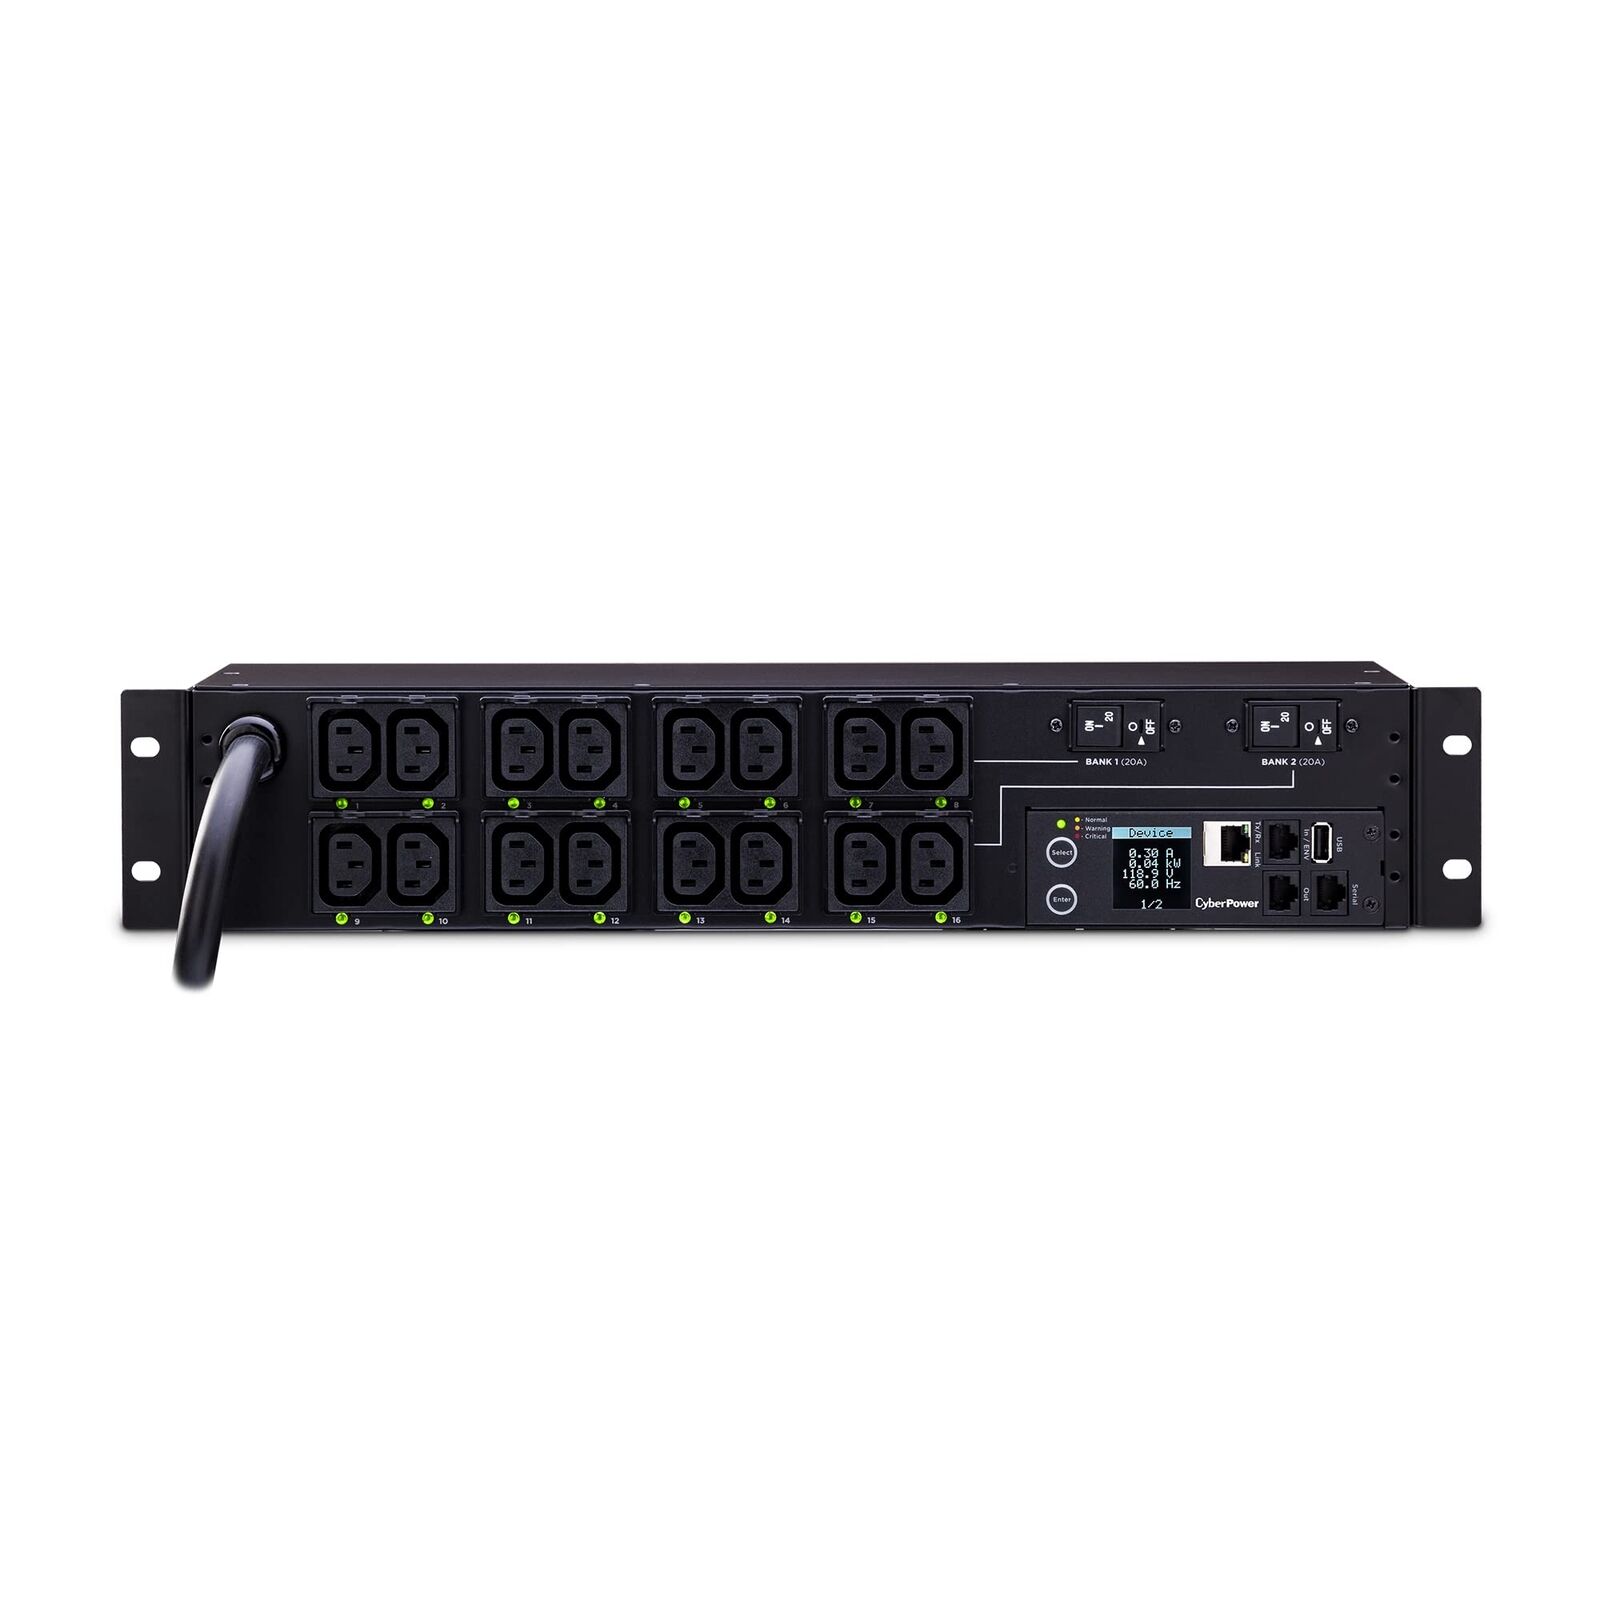 CyberPower PDU81007 Switched Metered-by-Outlet PDU, 200-240V, 30A, 16 Outlets